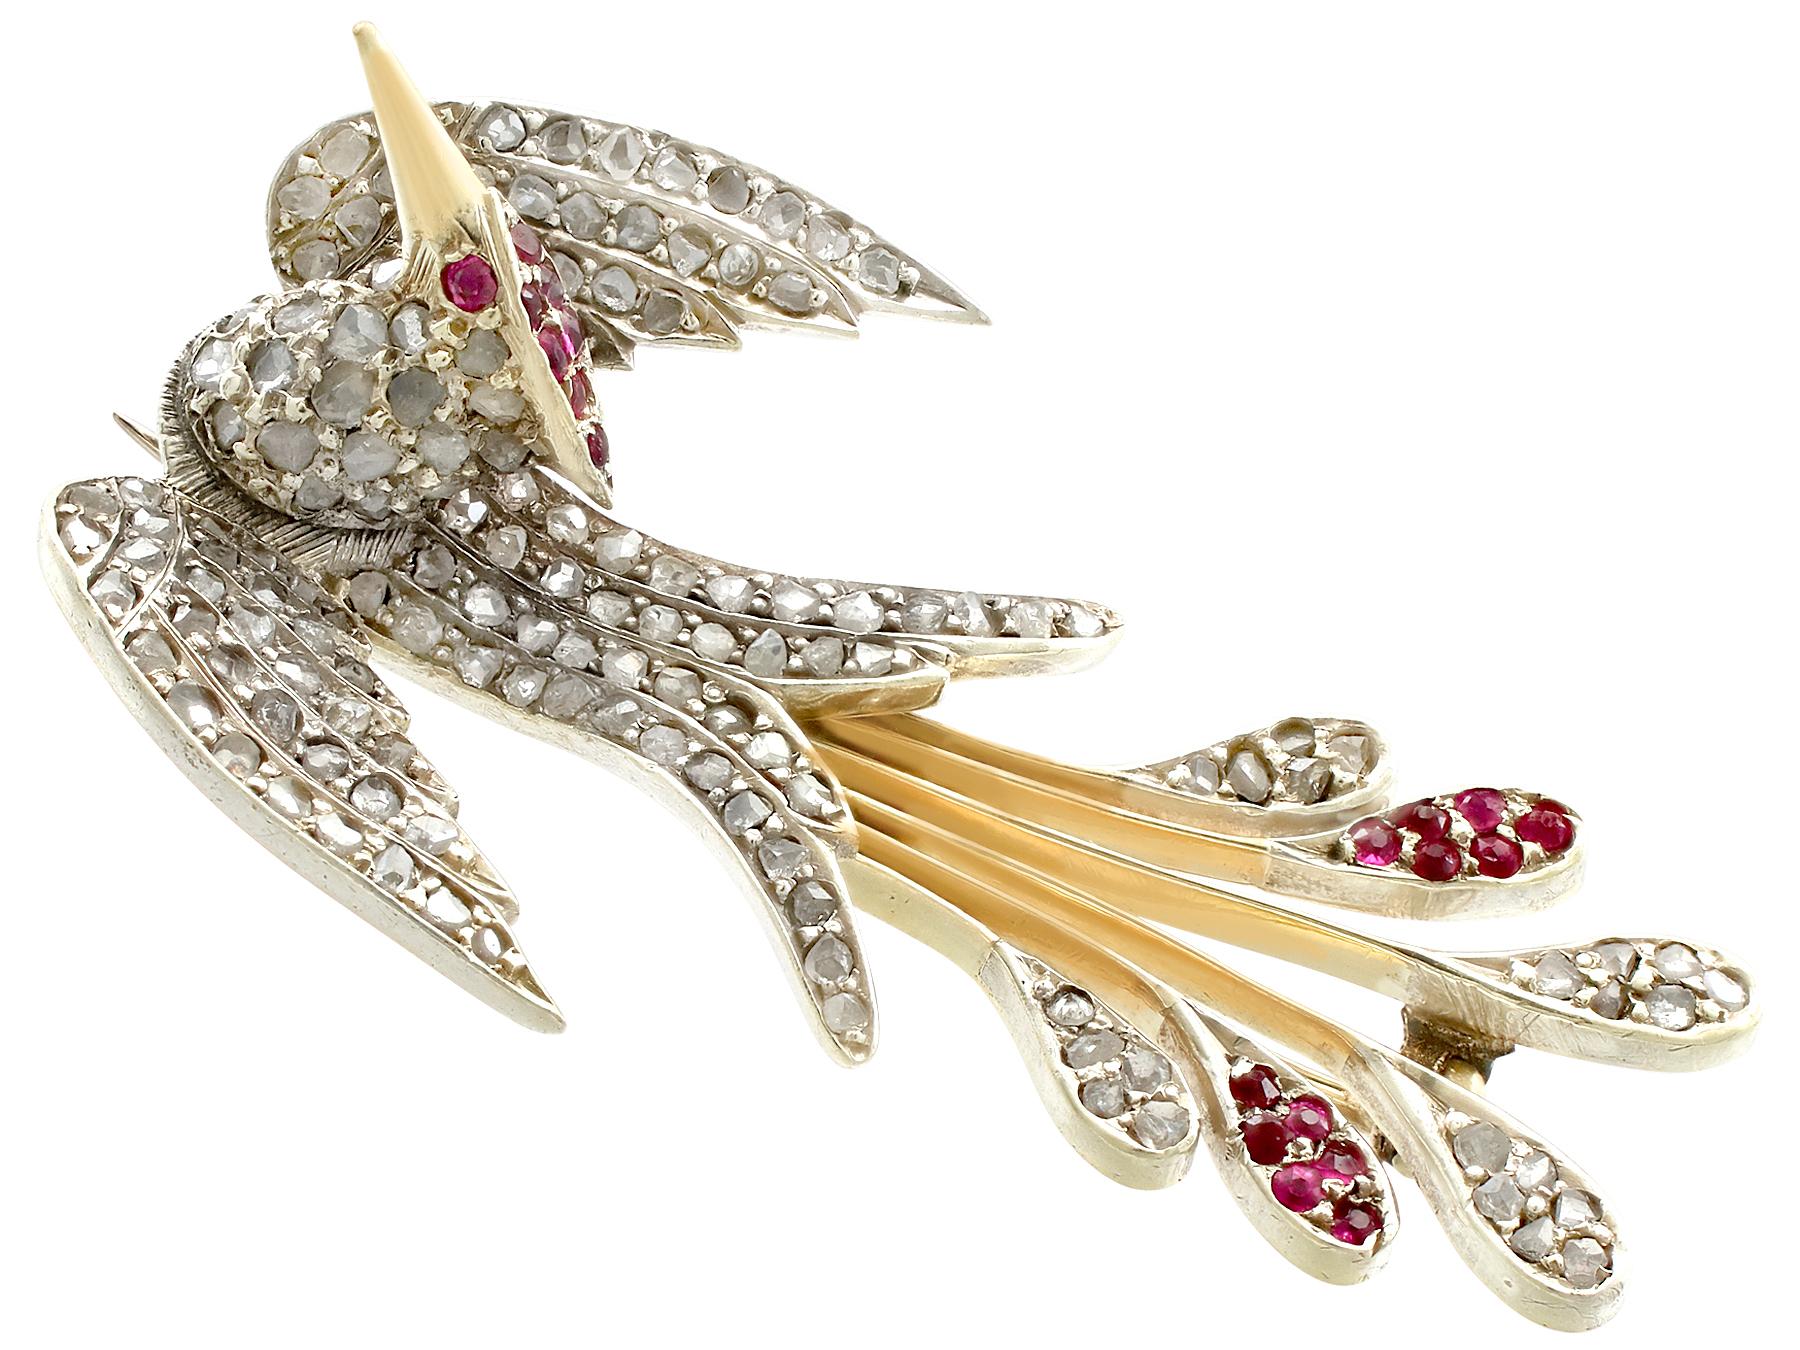 An impressive Victorian 0.23 carat ruby and 0.70 carat diamond, 10 karat yellow gold and silver set bird brooch; part of our diverse antique jewelry and estate jewelry collections.

This fine and impressive antique diamond brooch has been crafted in